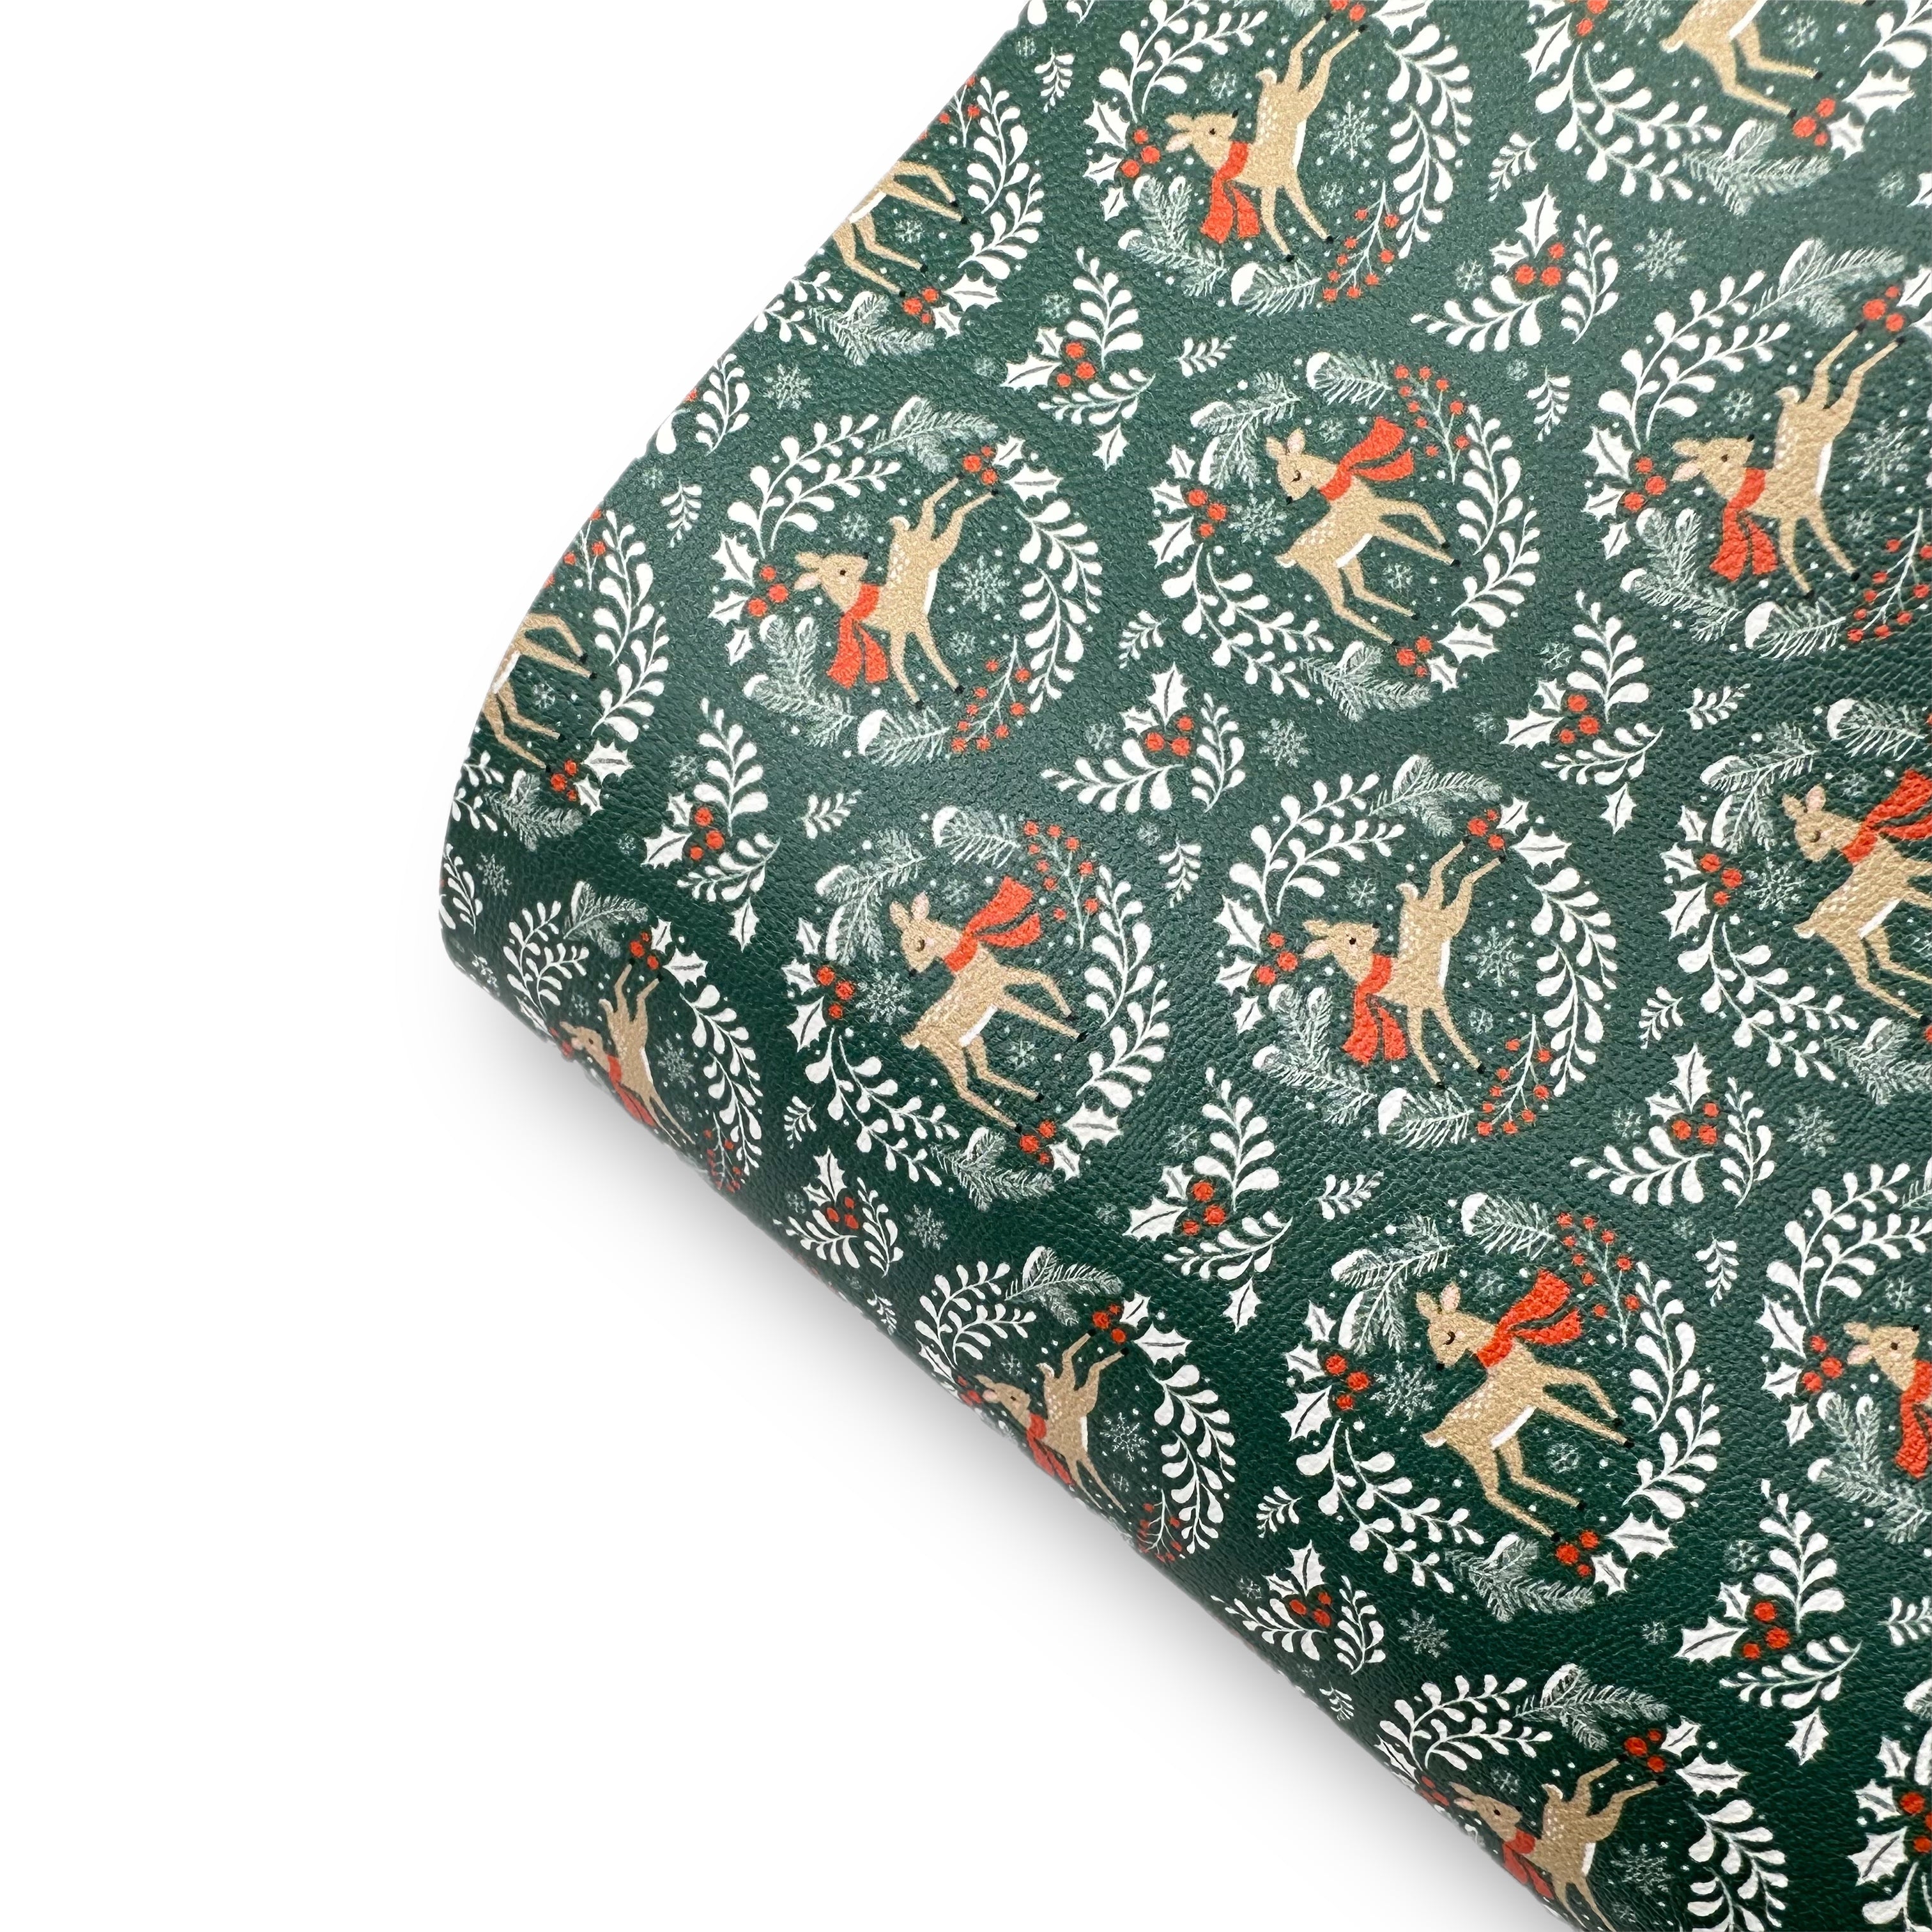 Little Winter Deer Premium Faux Leather Fabric Sheets